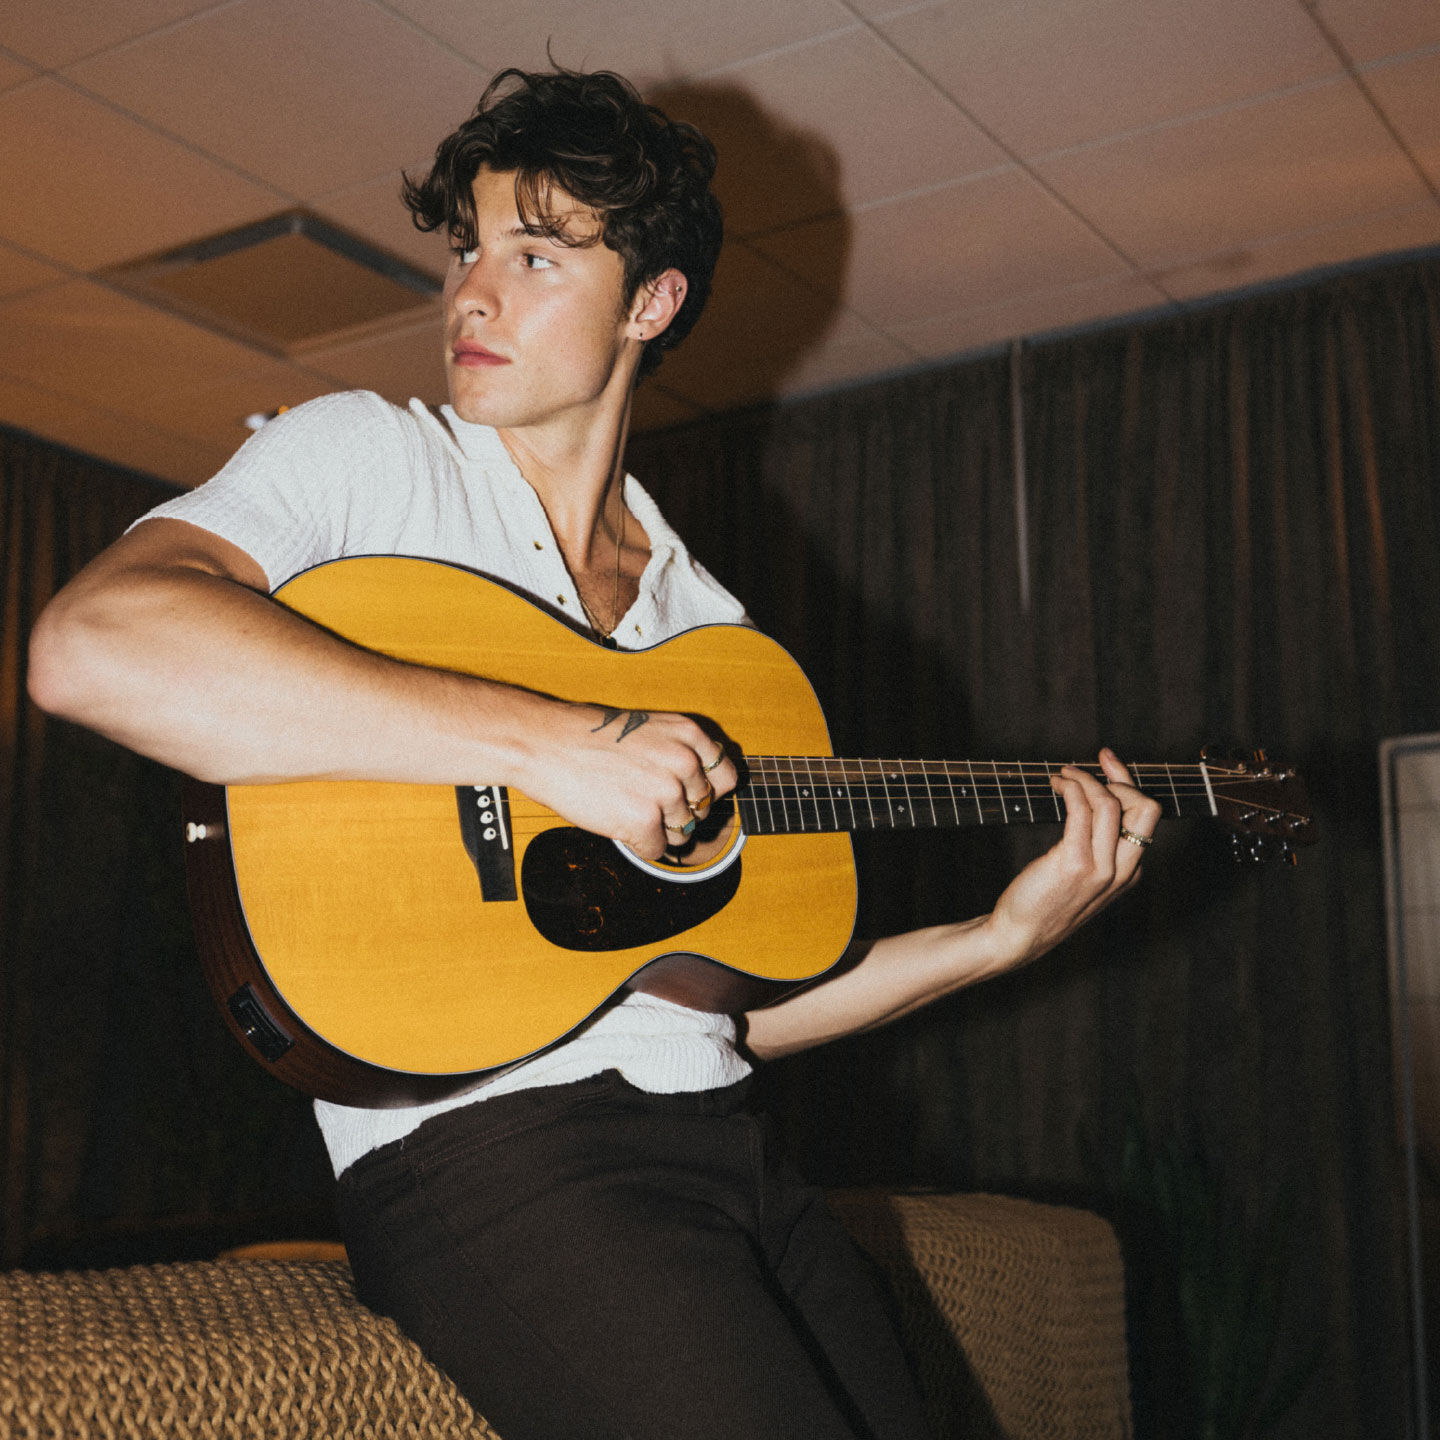 Shawn Mendez playing a 000 Martin in a white shirt while leaning against a mustard yellow couch